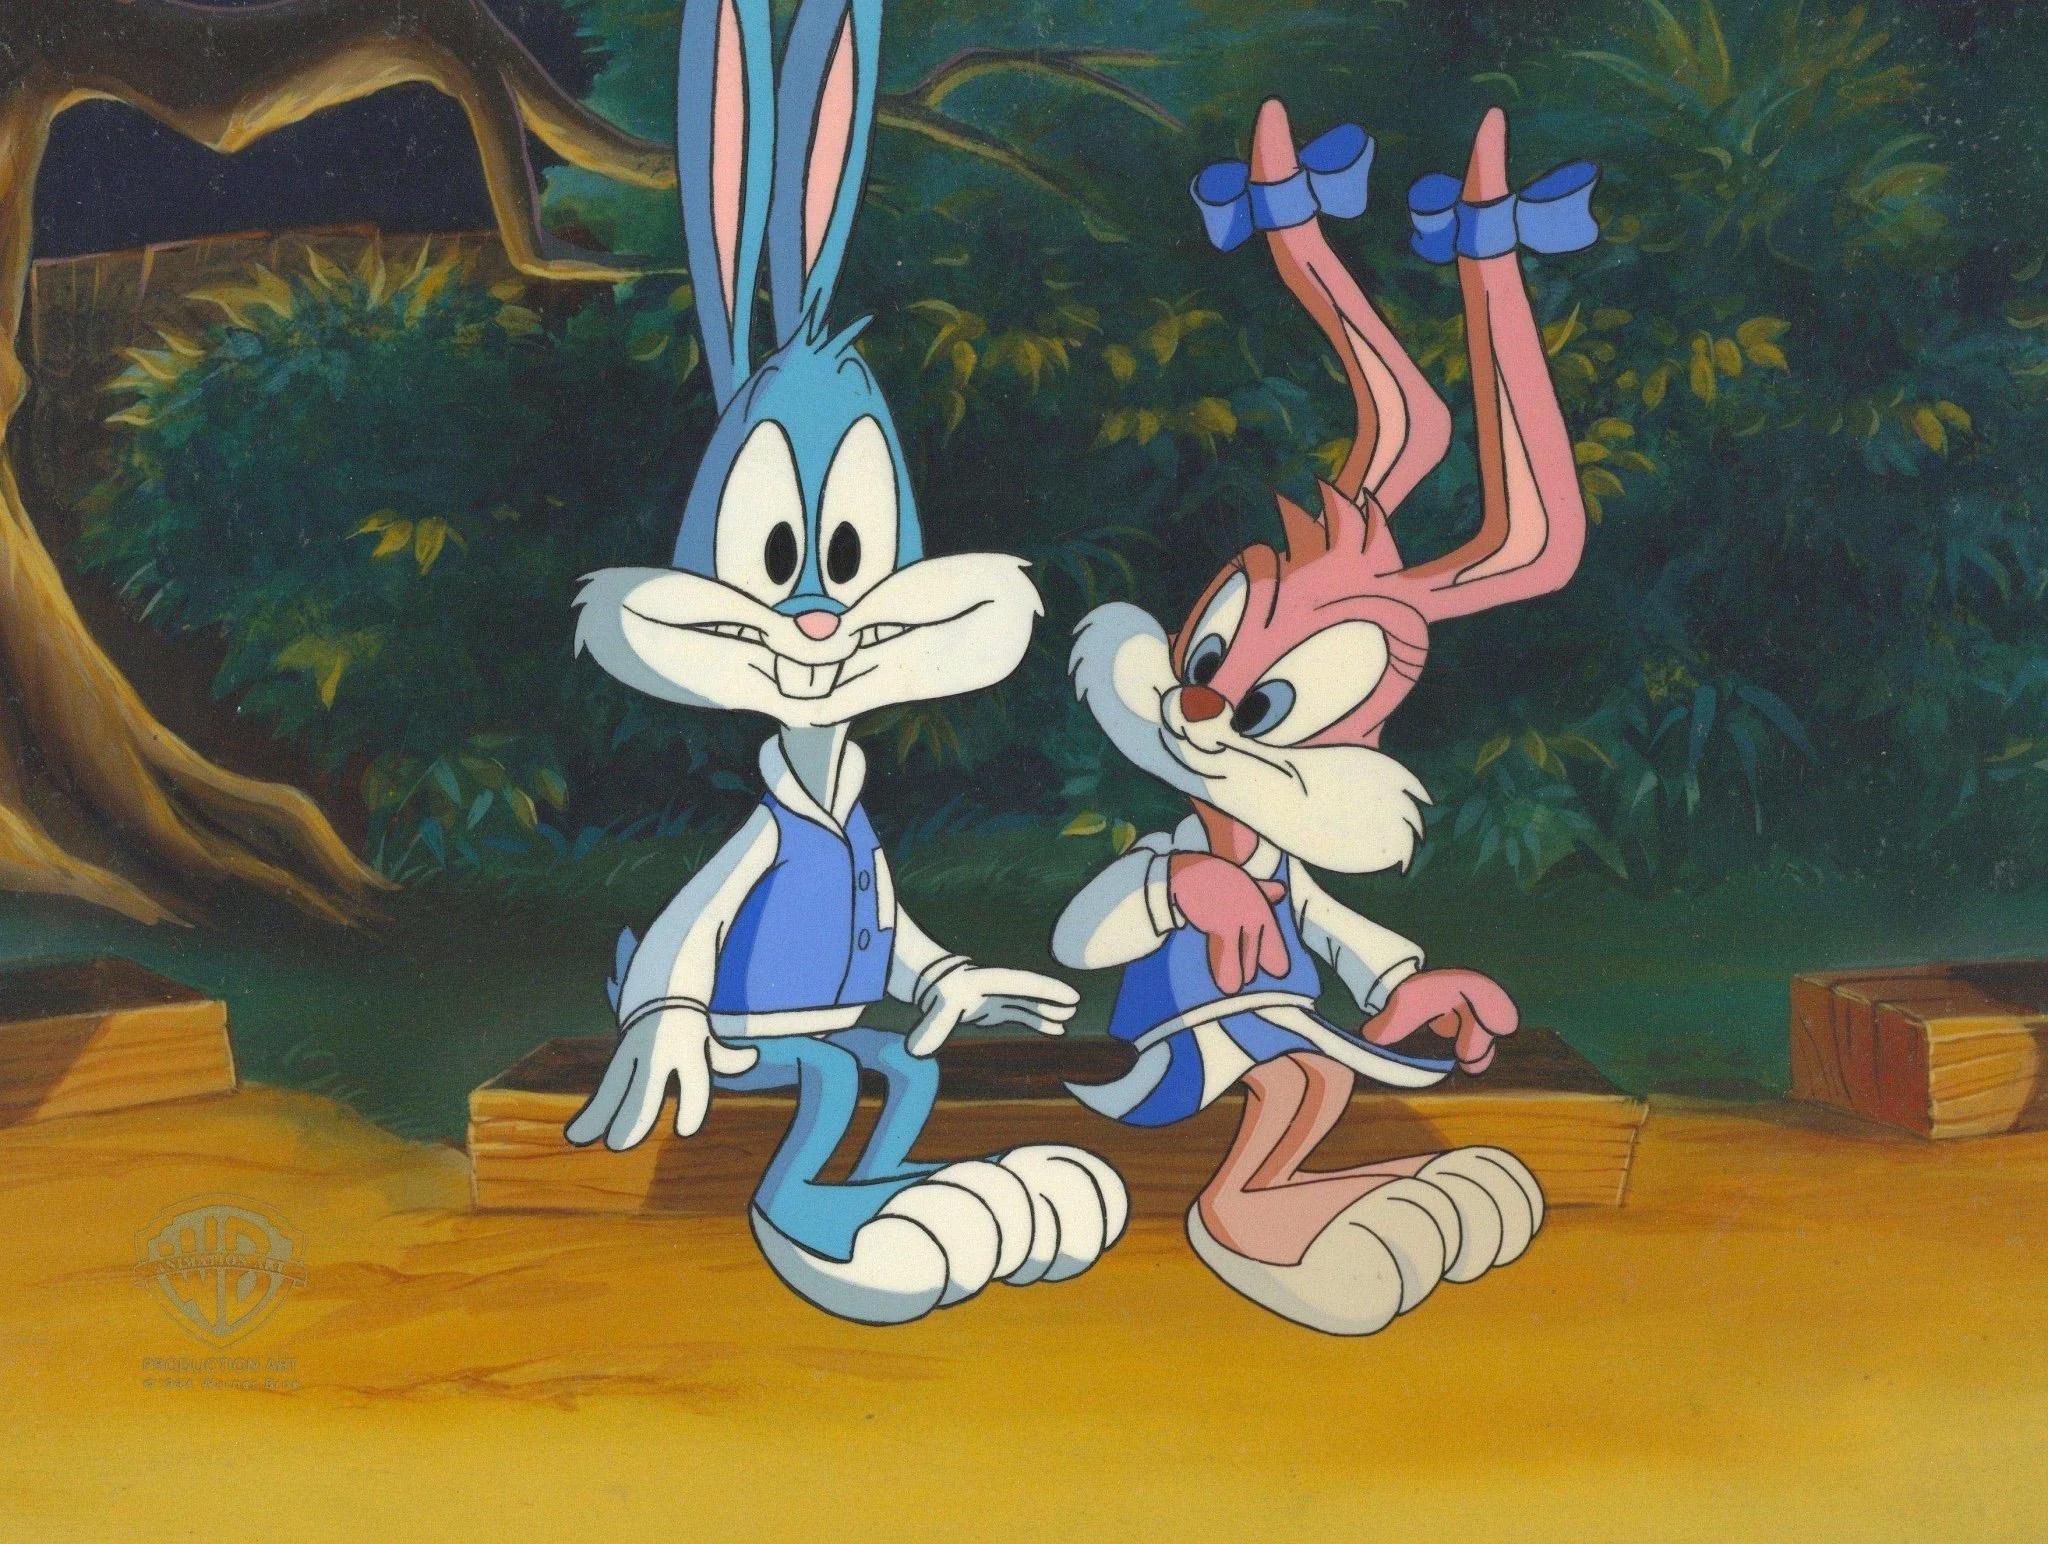 Tiny Toons Original Production Cel: Buster Bunny and Babs Bunny - Art by Warner Bros. Studio Artists